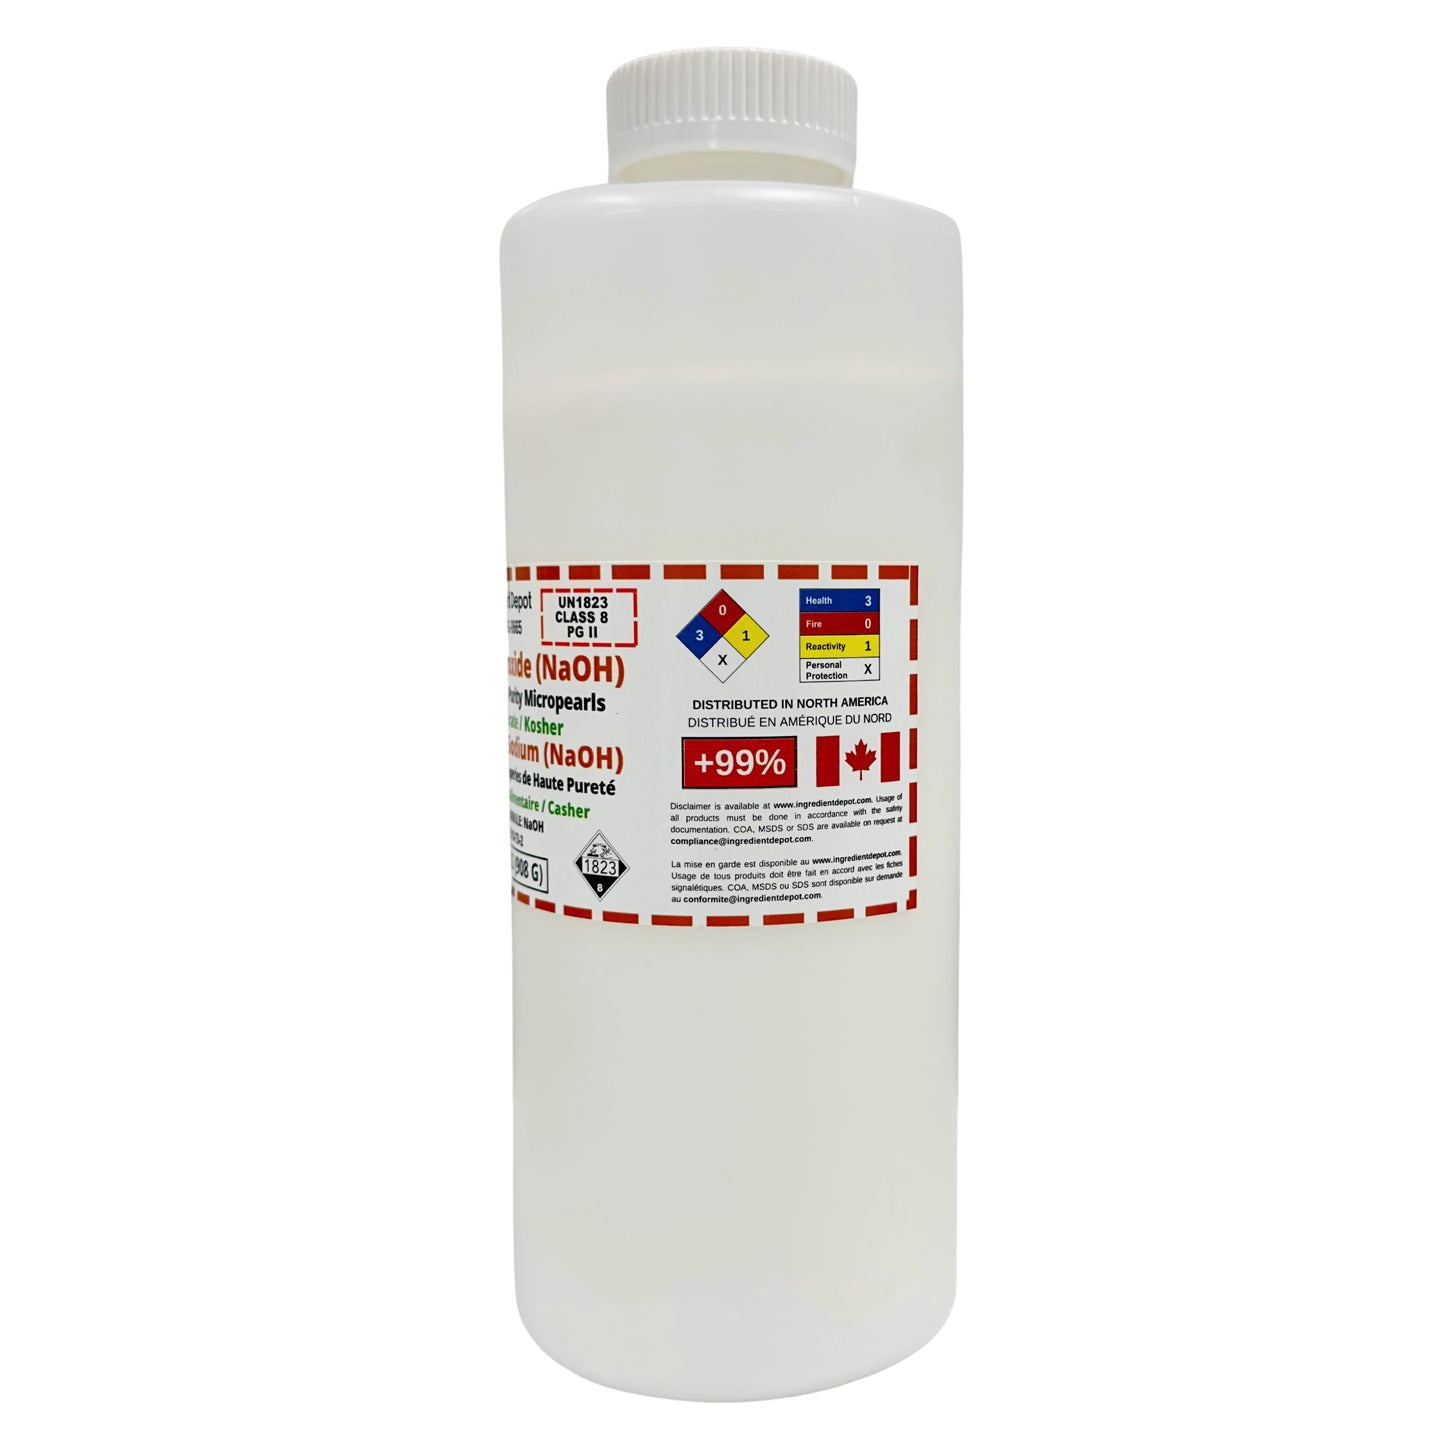 Sodium Hydroxide (NaOH or Caustic Soda) Micropearls Jar Right View